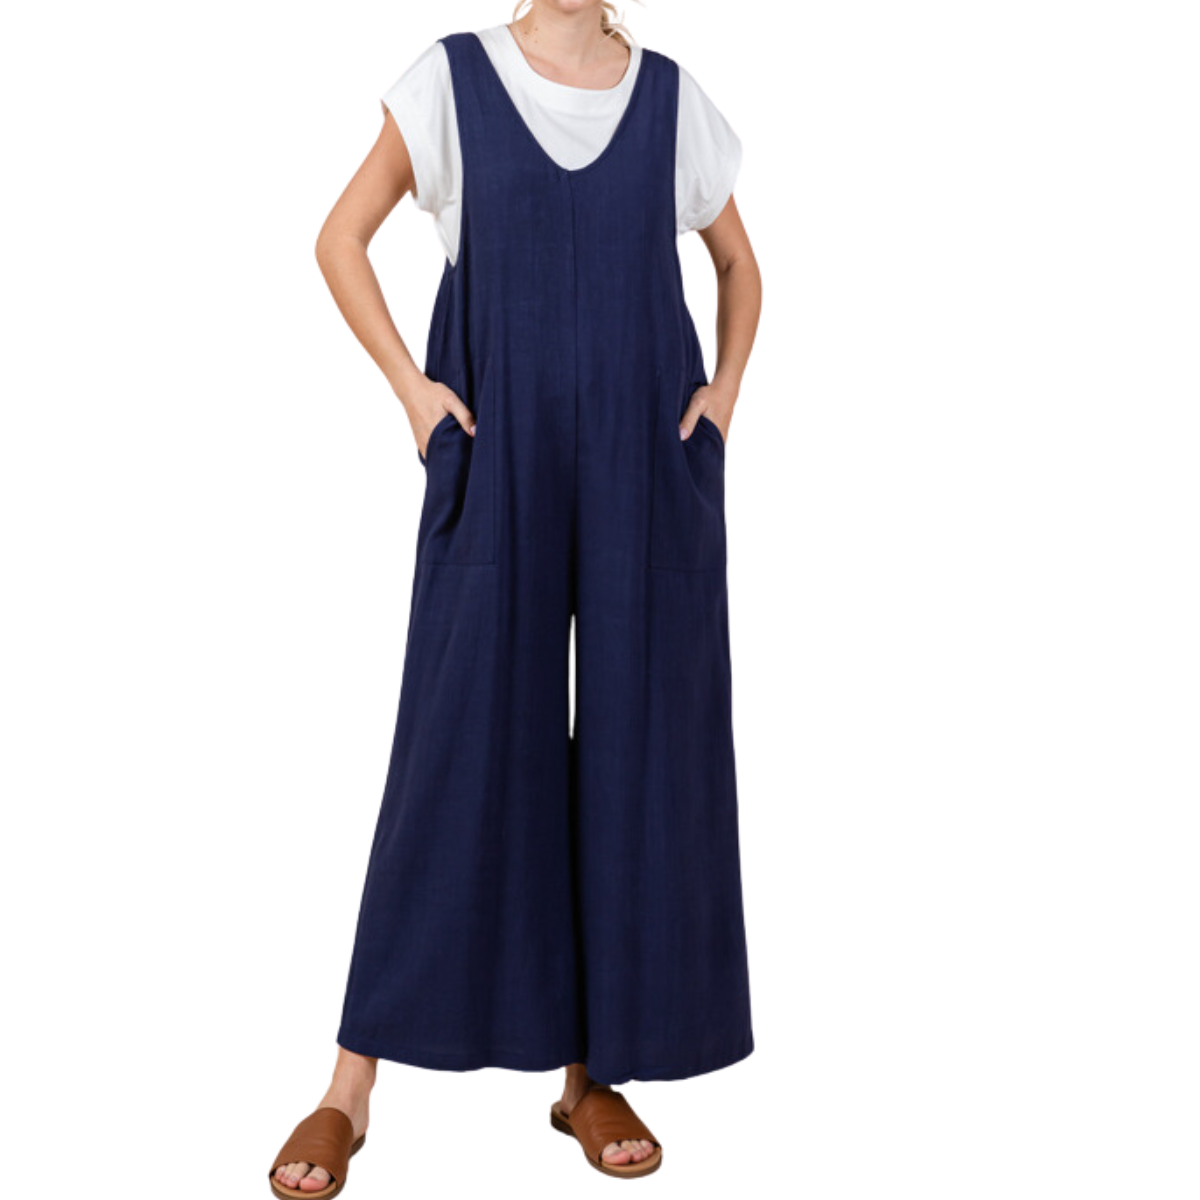 A person is wearing a white t-shirt underneath a loose-fitting, dark blue Jumpsuit by Jodifl with hands in pockets. They are also wearing brown open-toed sandals. The head and upper shoulders are cropped out of the image.